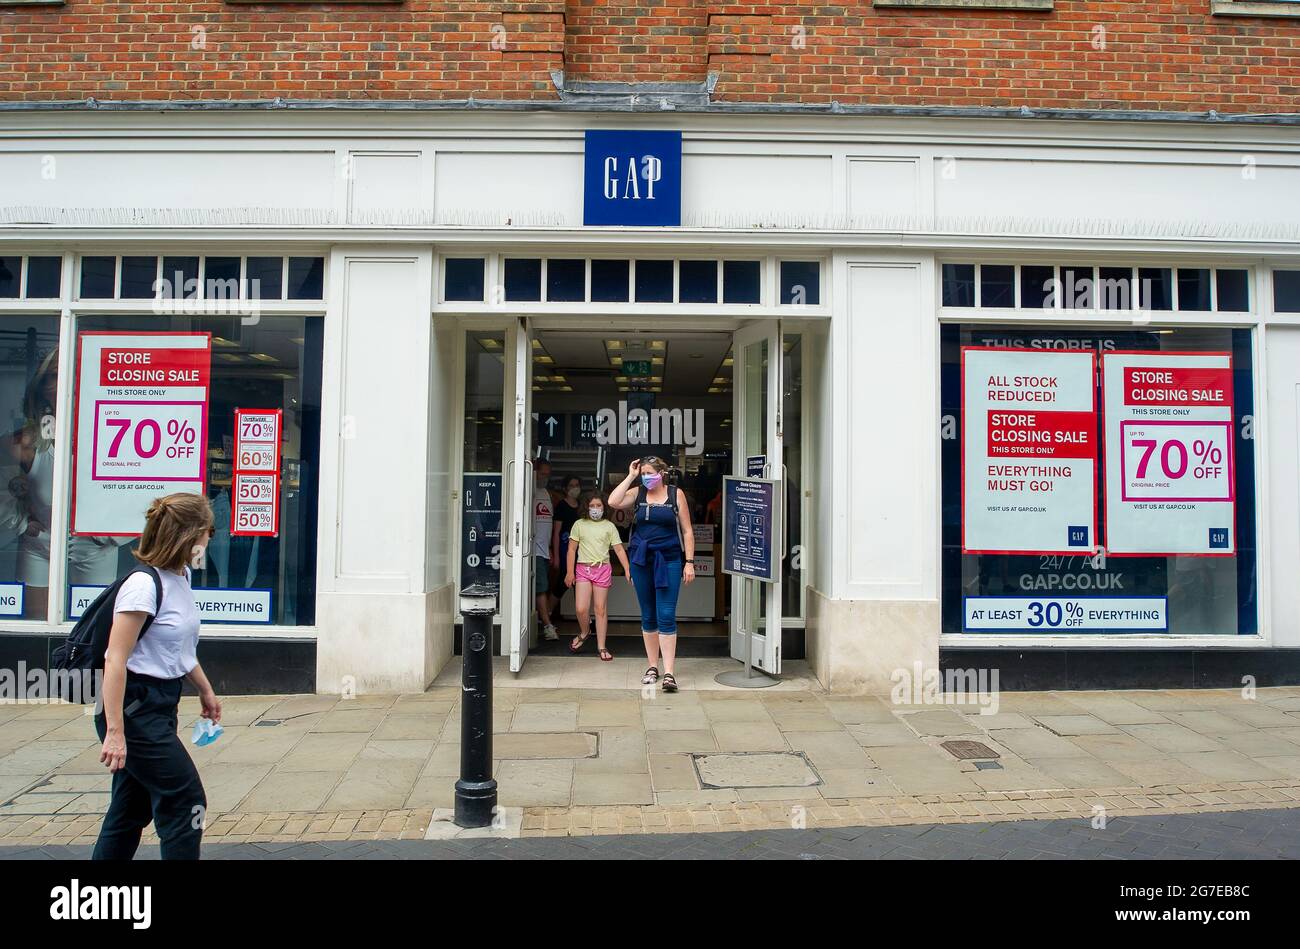 Windsor, Berkshire, UK. 13th July, 2021. The GAP store in Windsor is  closing down are currently holding a sale with up to 70% off. Credit:  Maureen McLean/Alamy Live News Stock Photo - Alamy